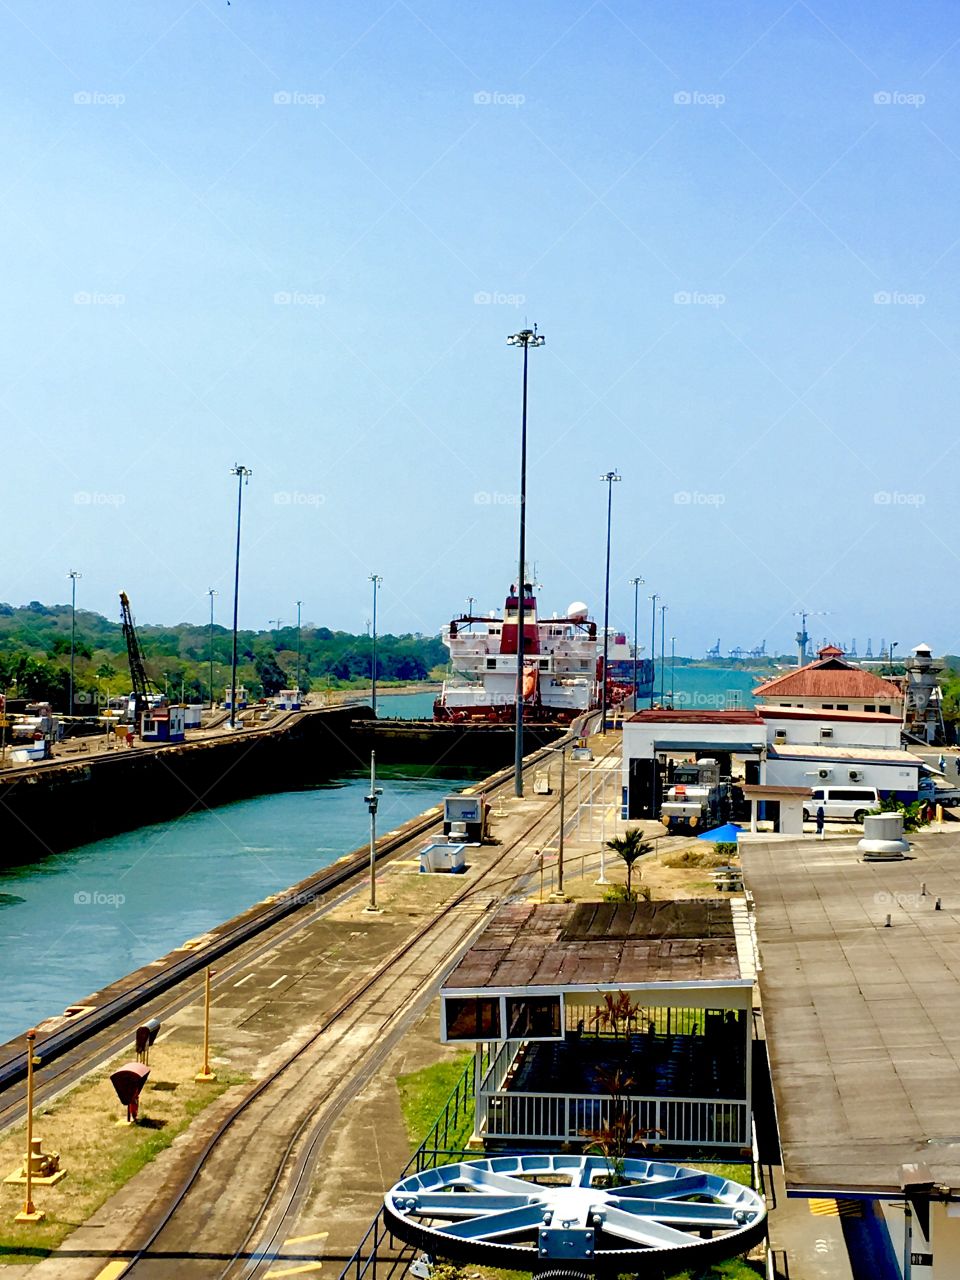 The Caribbean side of the Panama Canal